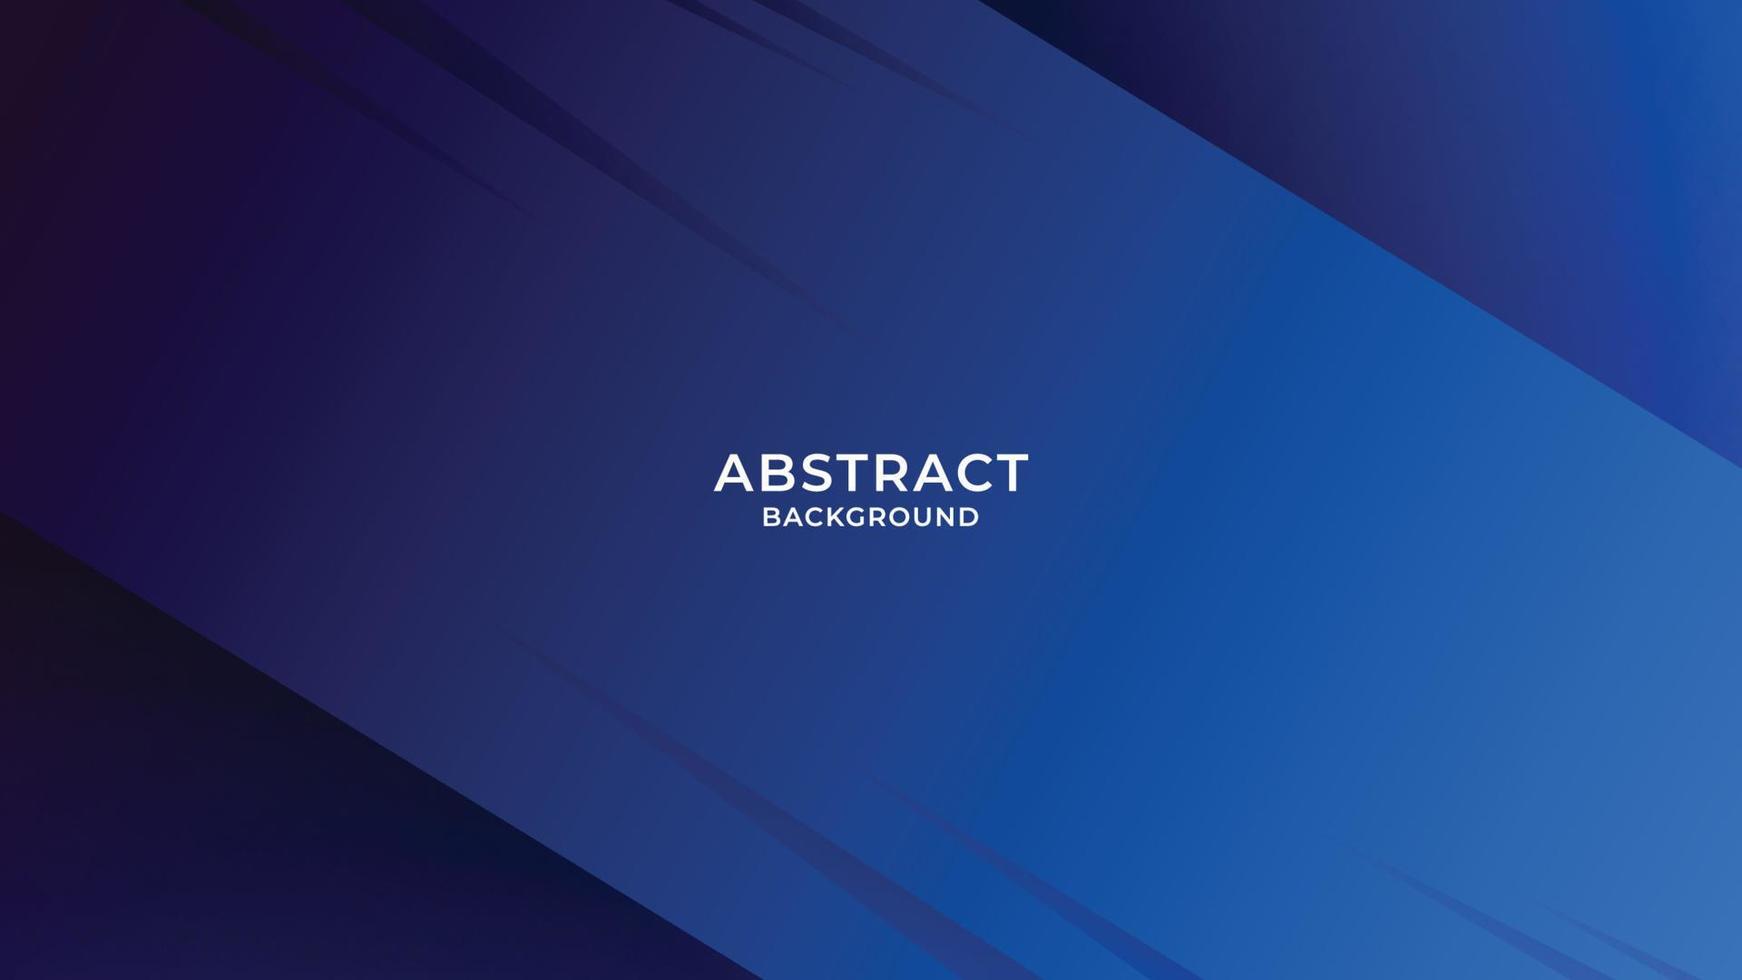 Abstract blue Background Design Template vector